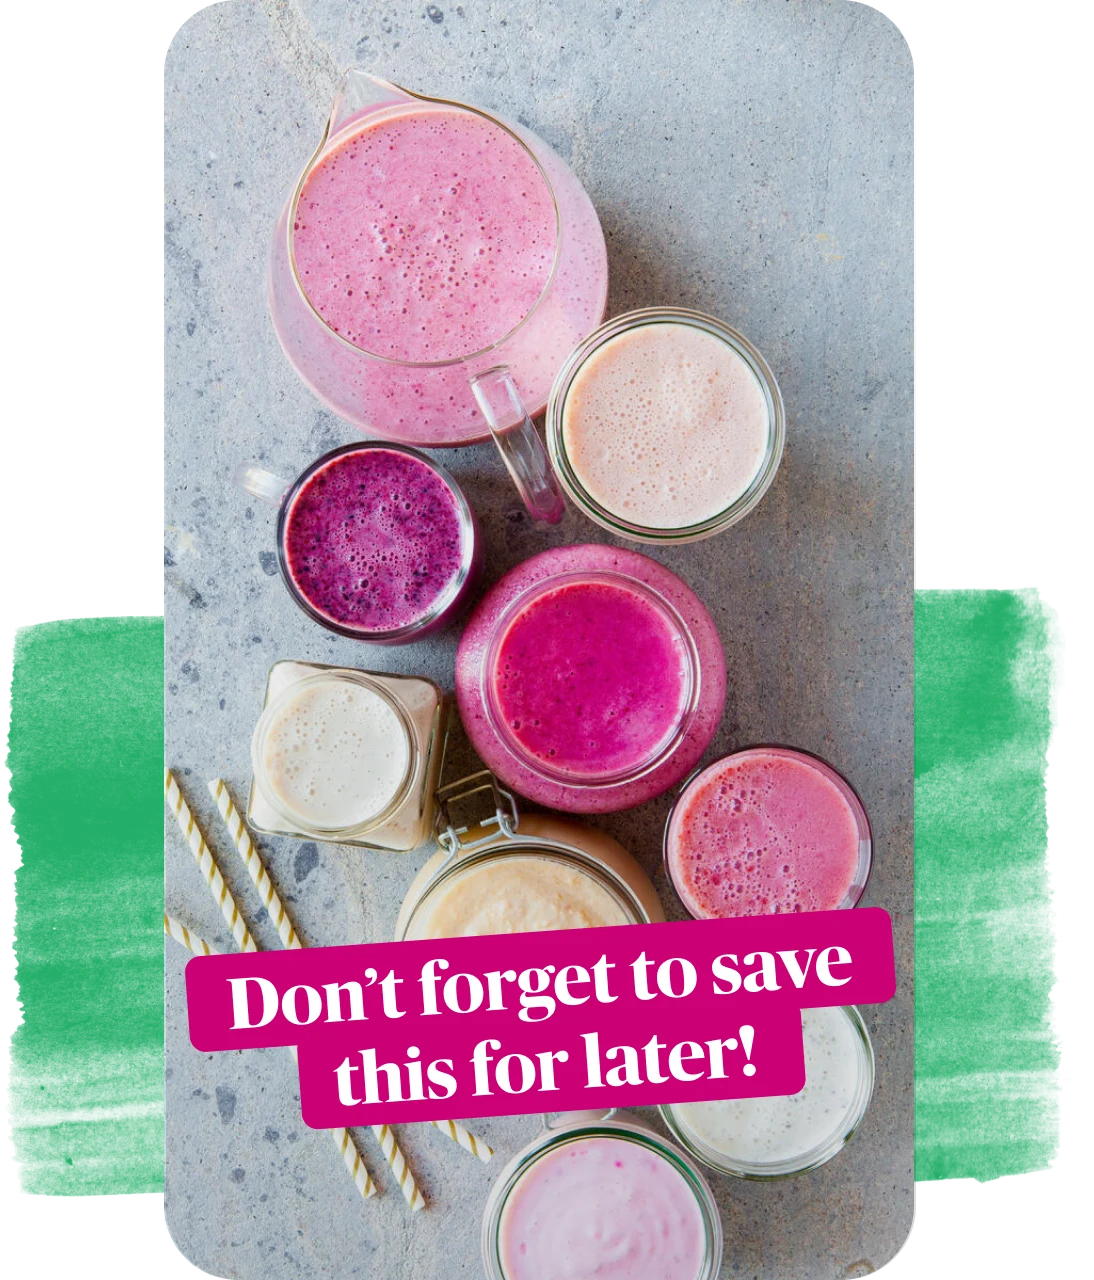 ‘Don’t forget to save this for later’ text label on pink background overlaid on a Pin of juice in glasses